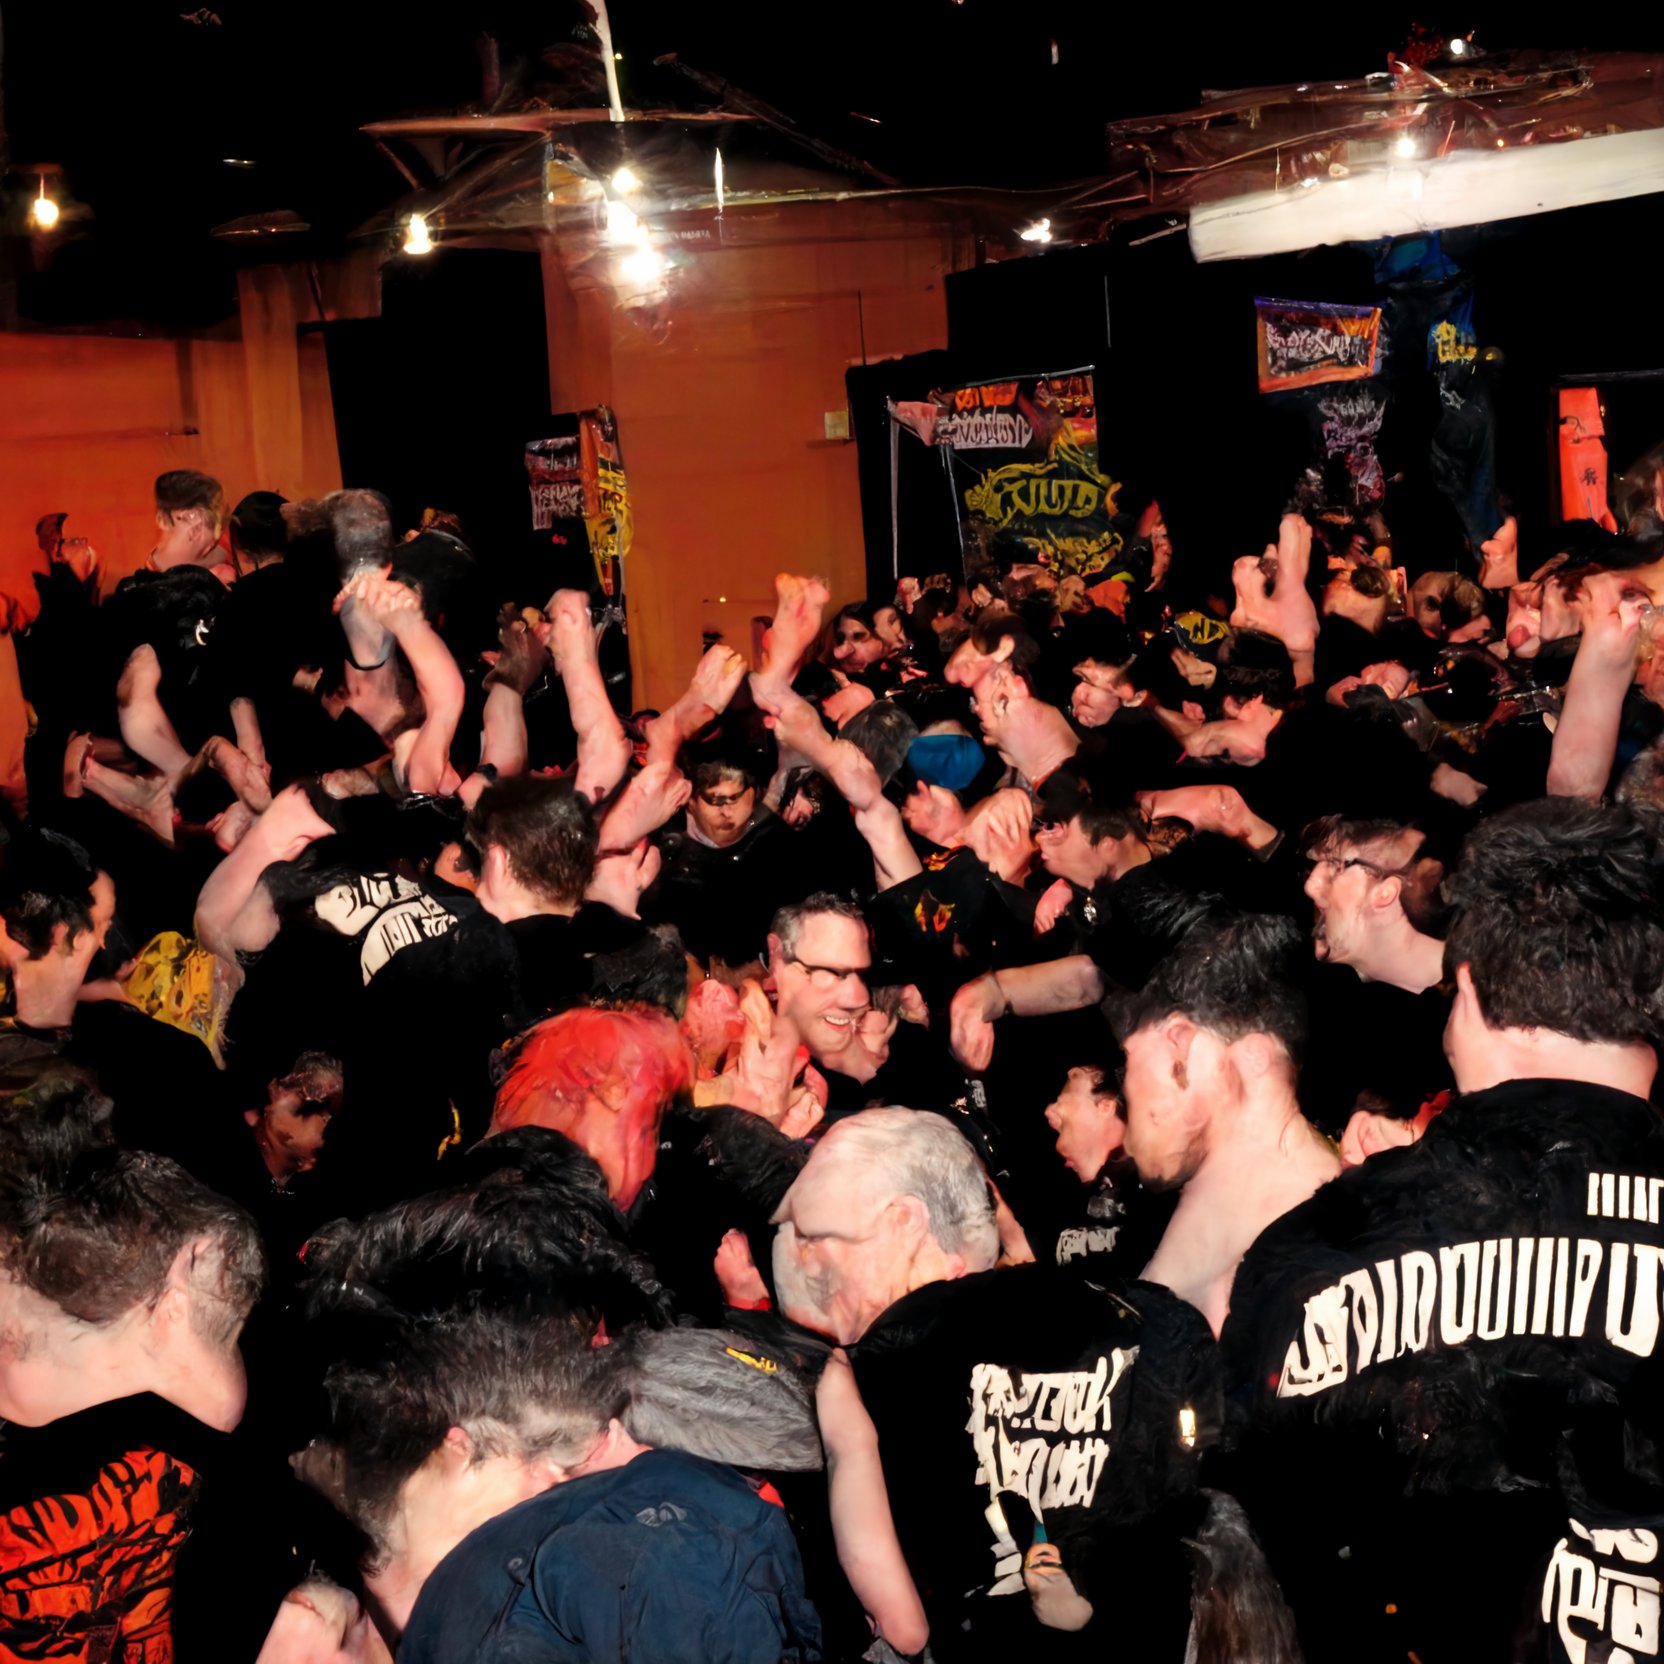 prompthunt: righteous jams moshpit hXc punk rock crowd surf sold out venue  punch dance breakdown extreme stage dive mosh pit TUI Boston Beatdown  invasion righteous jams rage of discipline donnybrook down for